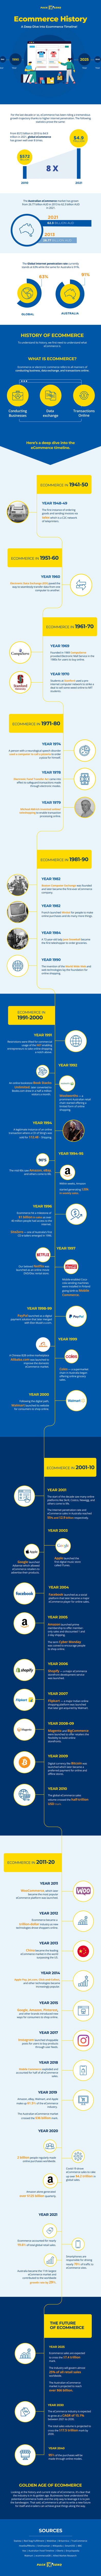 Ecommerce History A Deep Dive into Ecommerce Timeline